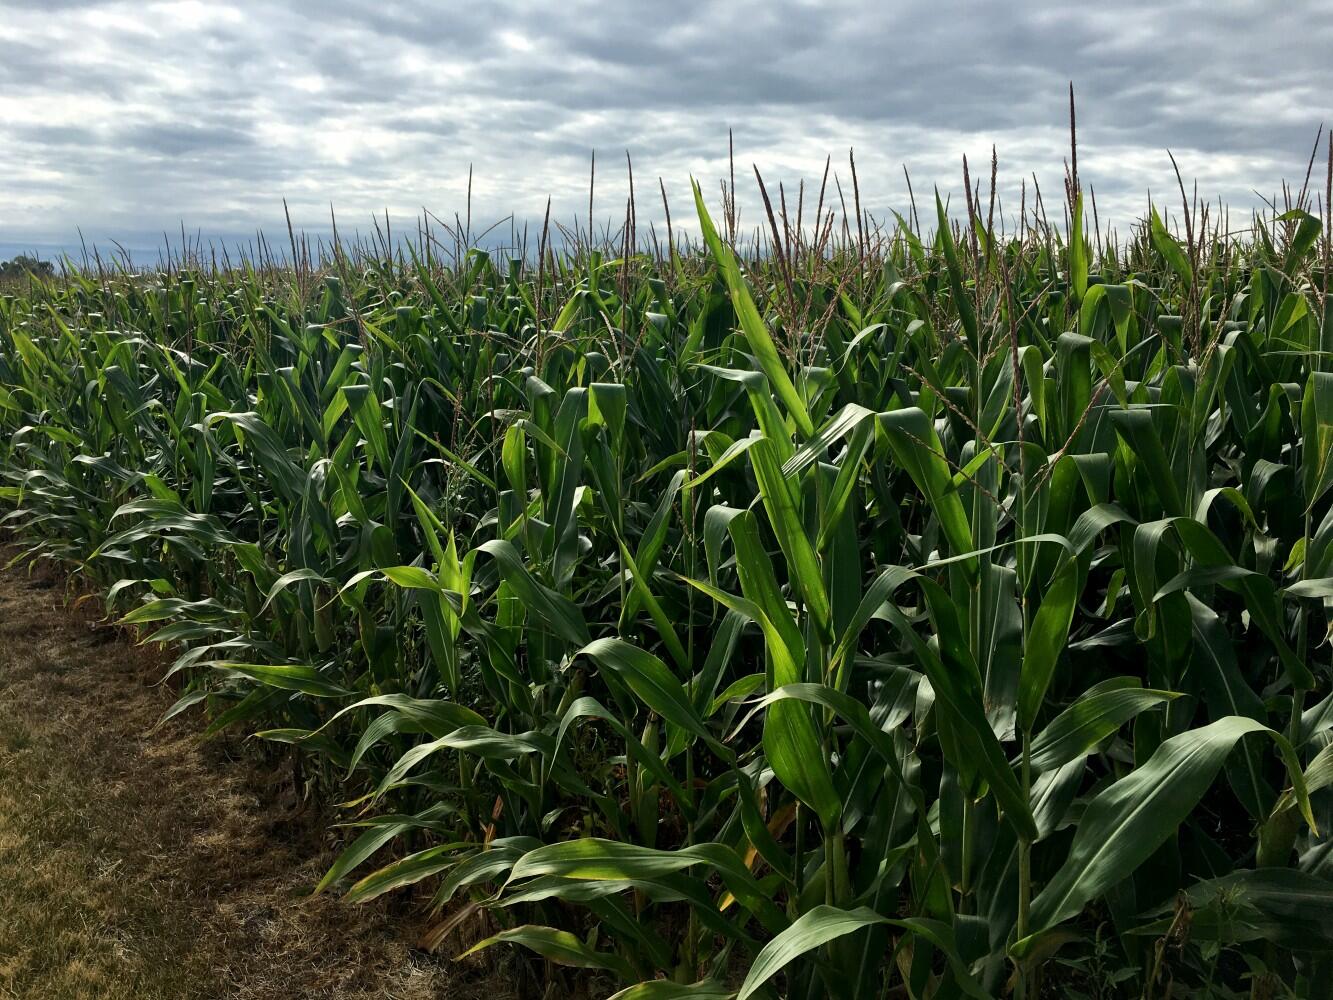 Corn and other crops are not adapted to benefit from elevated carbon dioxide levels